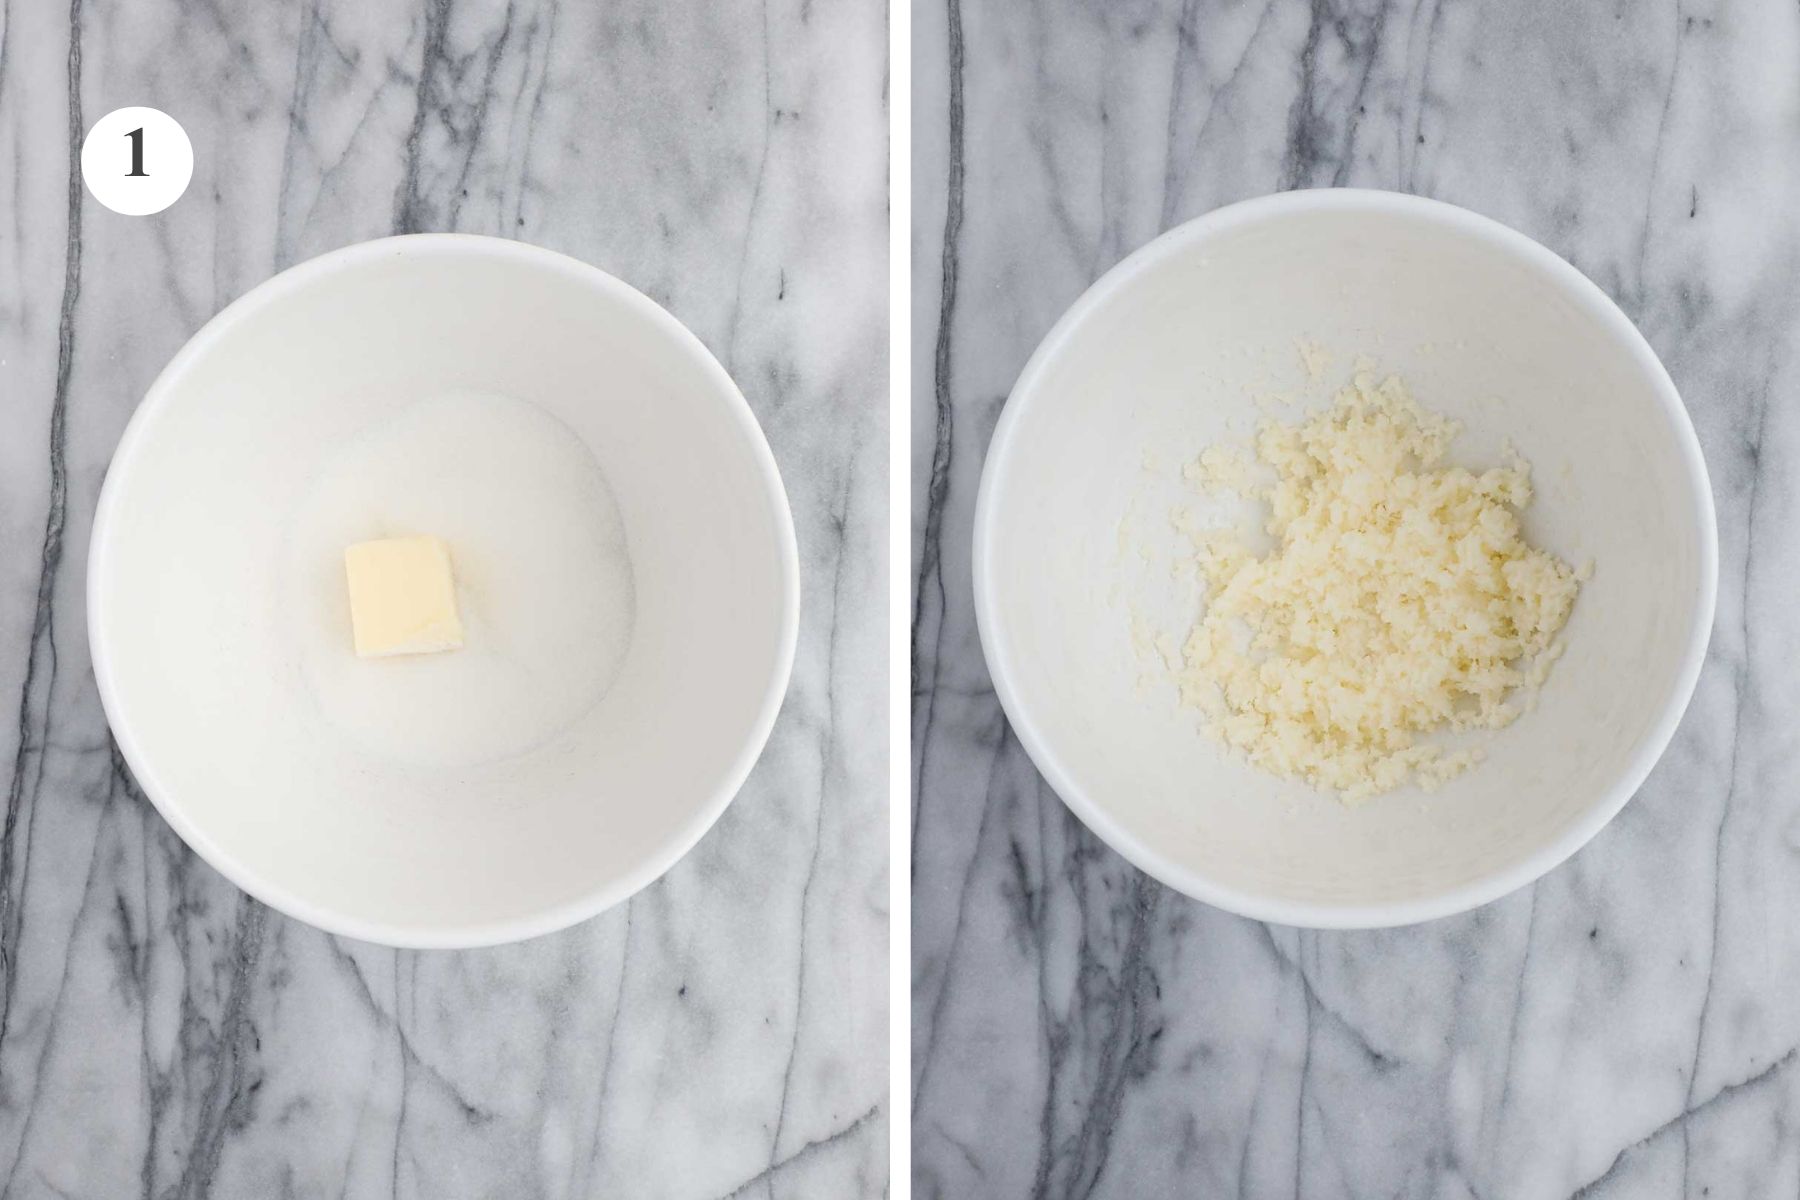 Mixing Bowl with softened butter and granulated sugar, next to image of the same bowl with the butter and sugar combined.